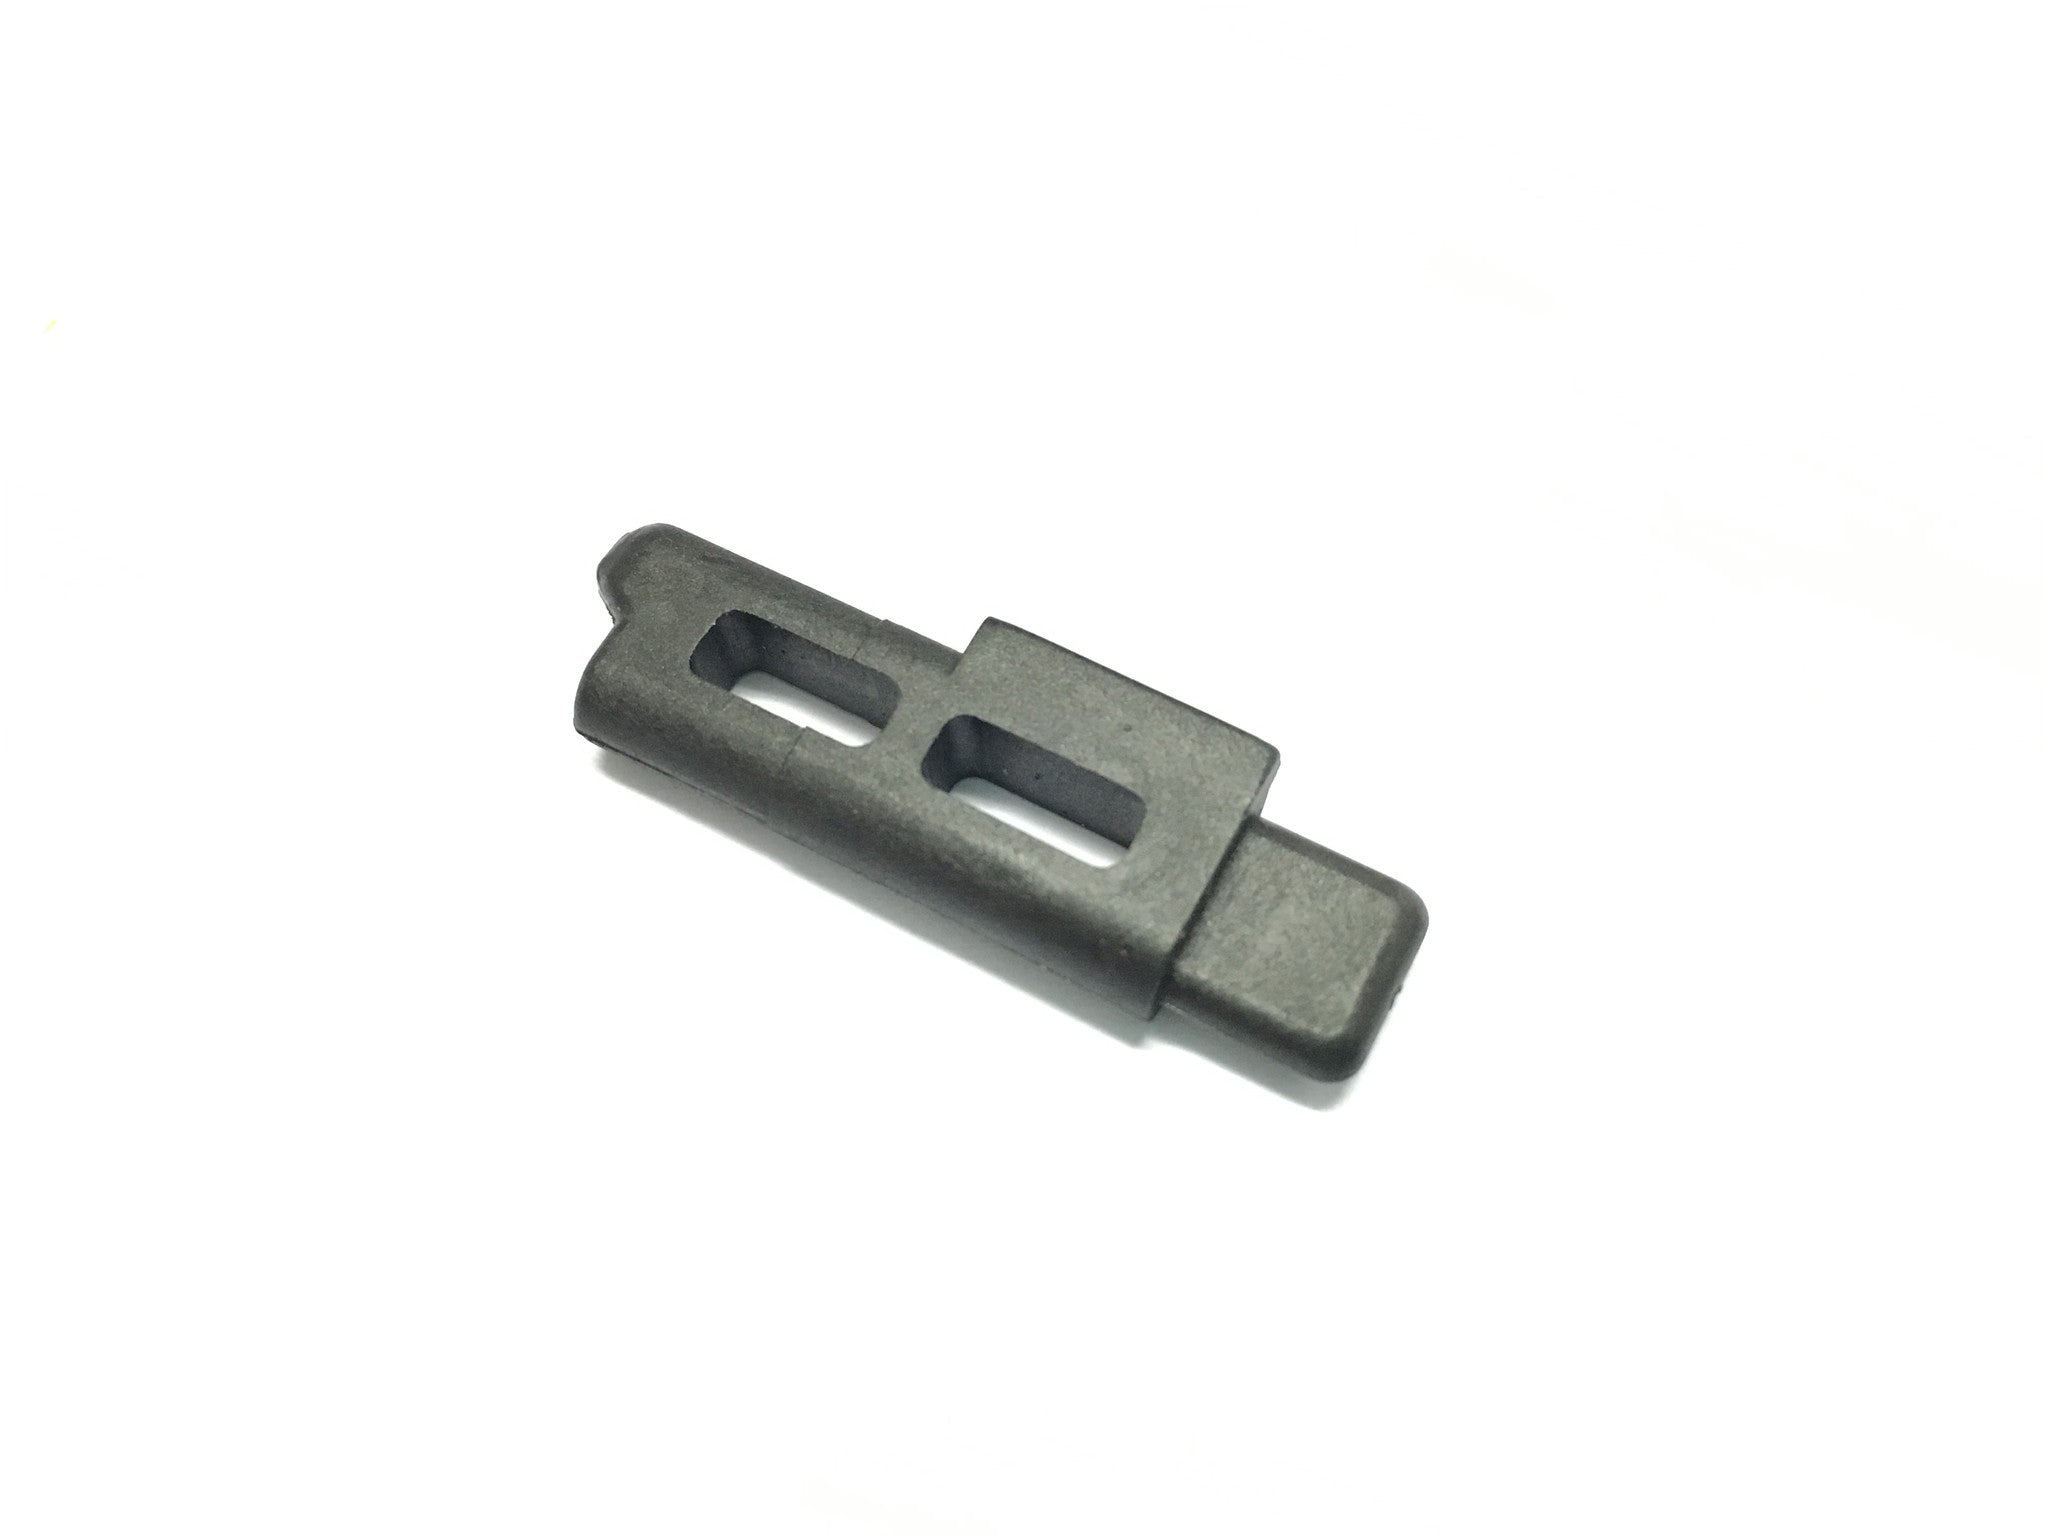 Magazine Follower(Mag. Part No.5) For KWA (MP Series) LM4 / KSC LM4 RIS Ver. I